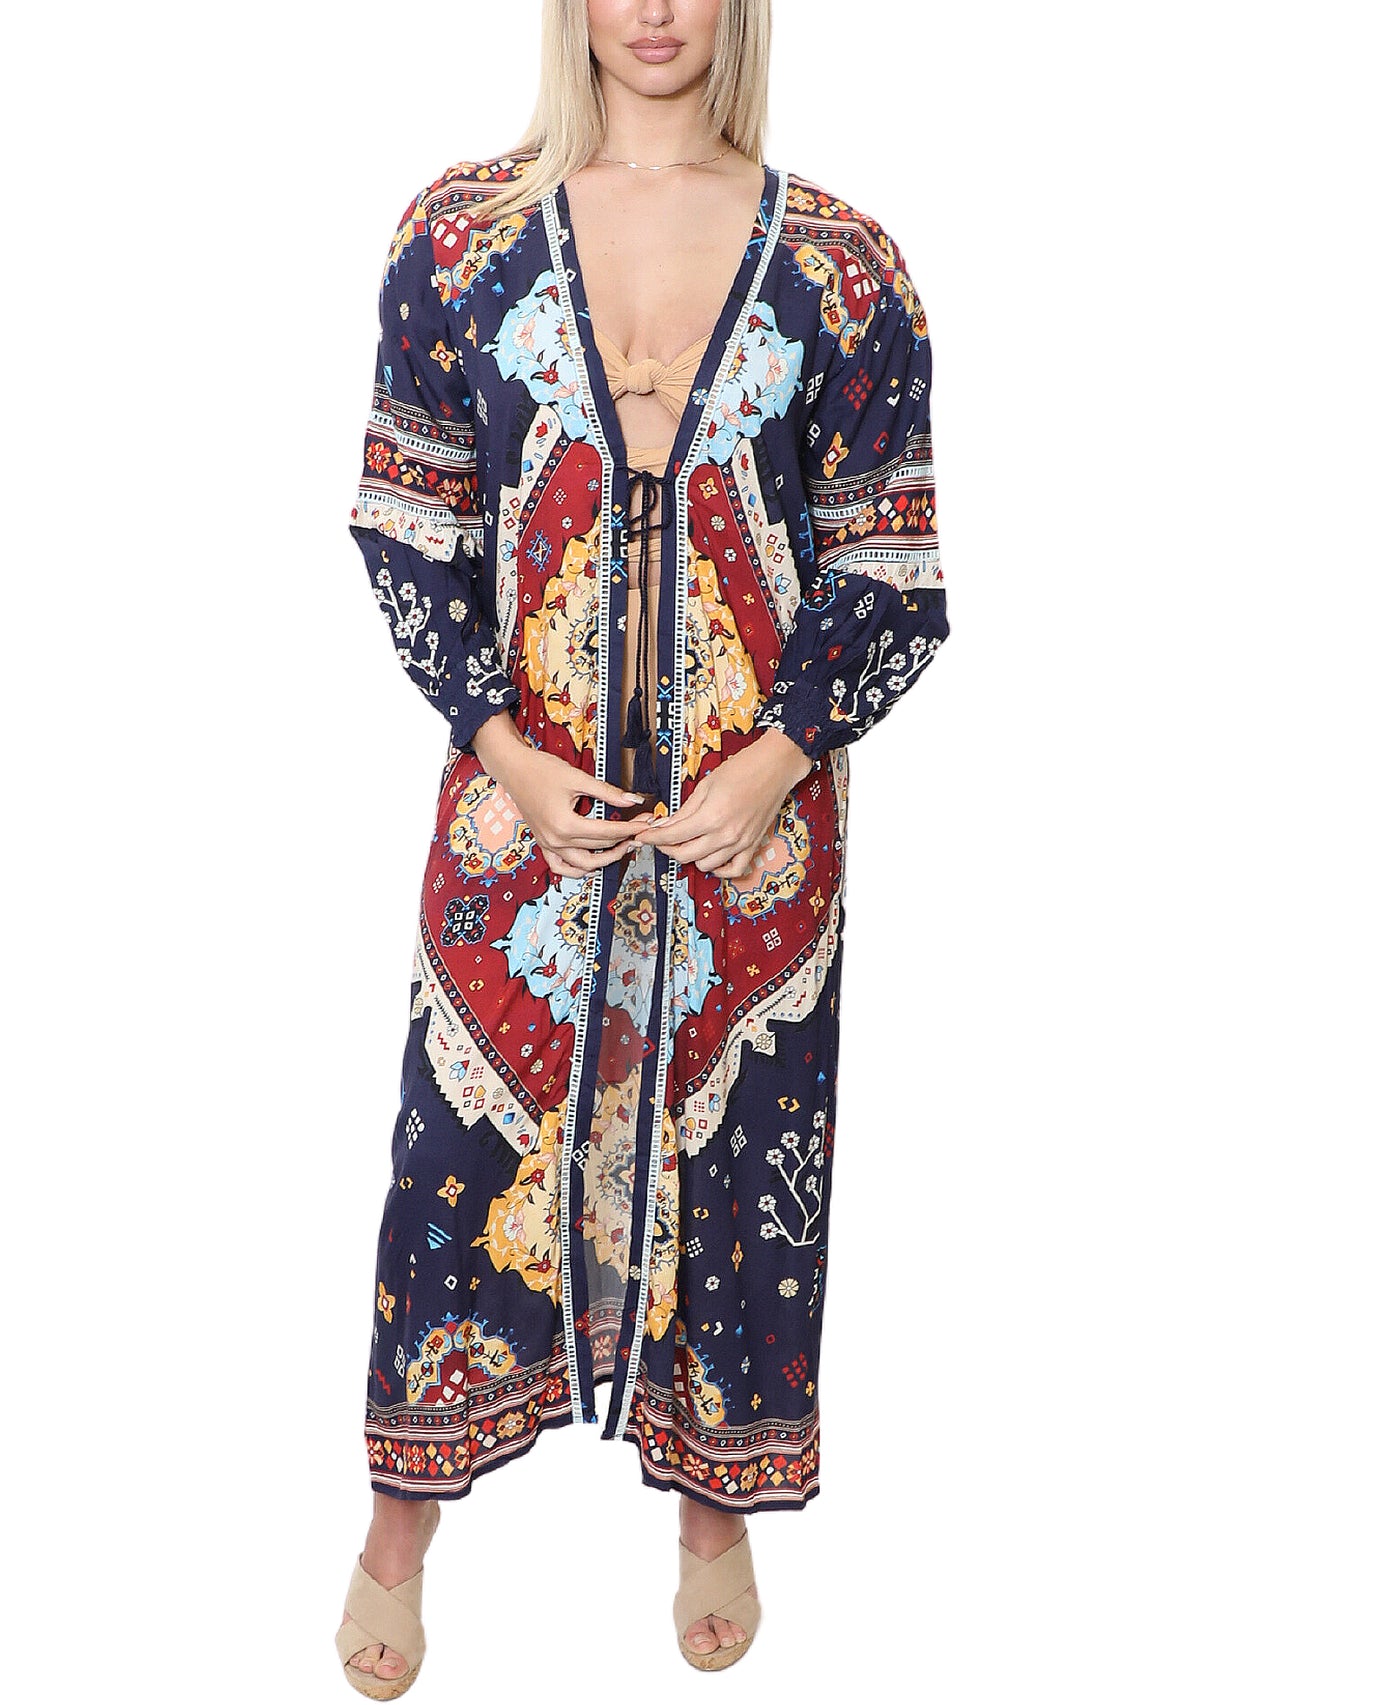 Abstract Print Swim Cover-Up Dress image 1